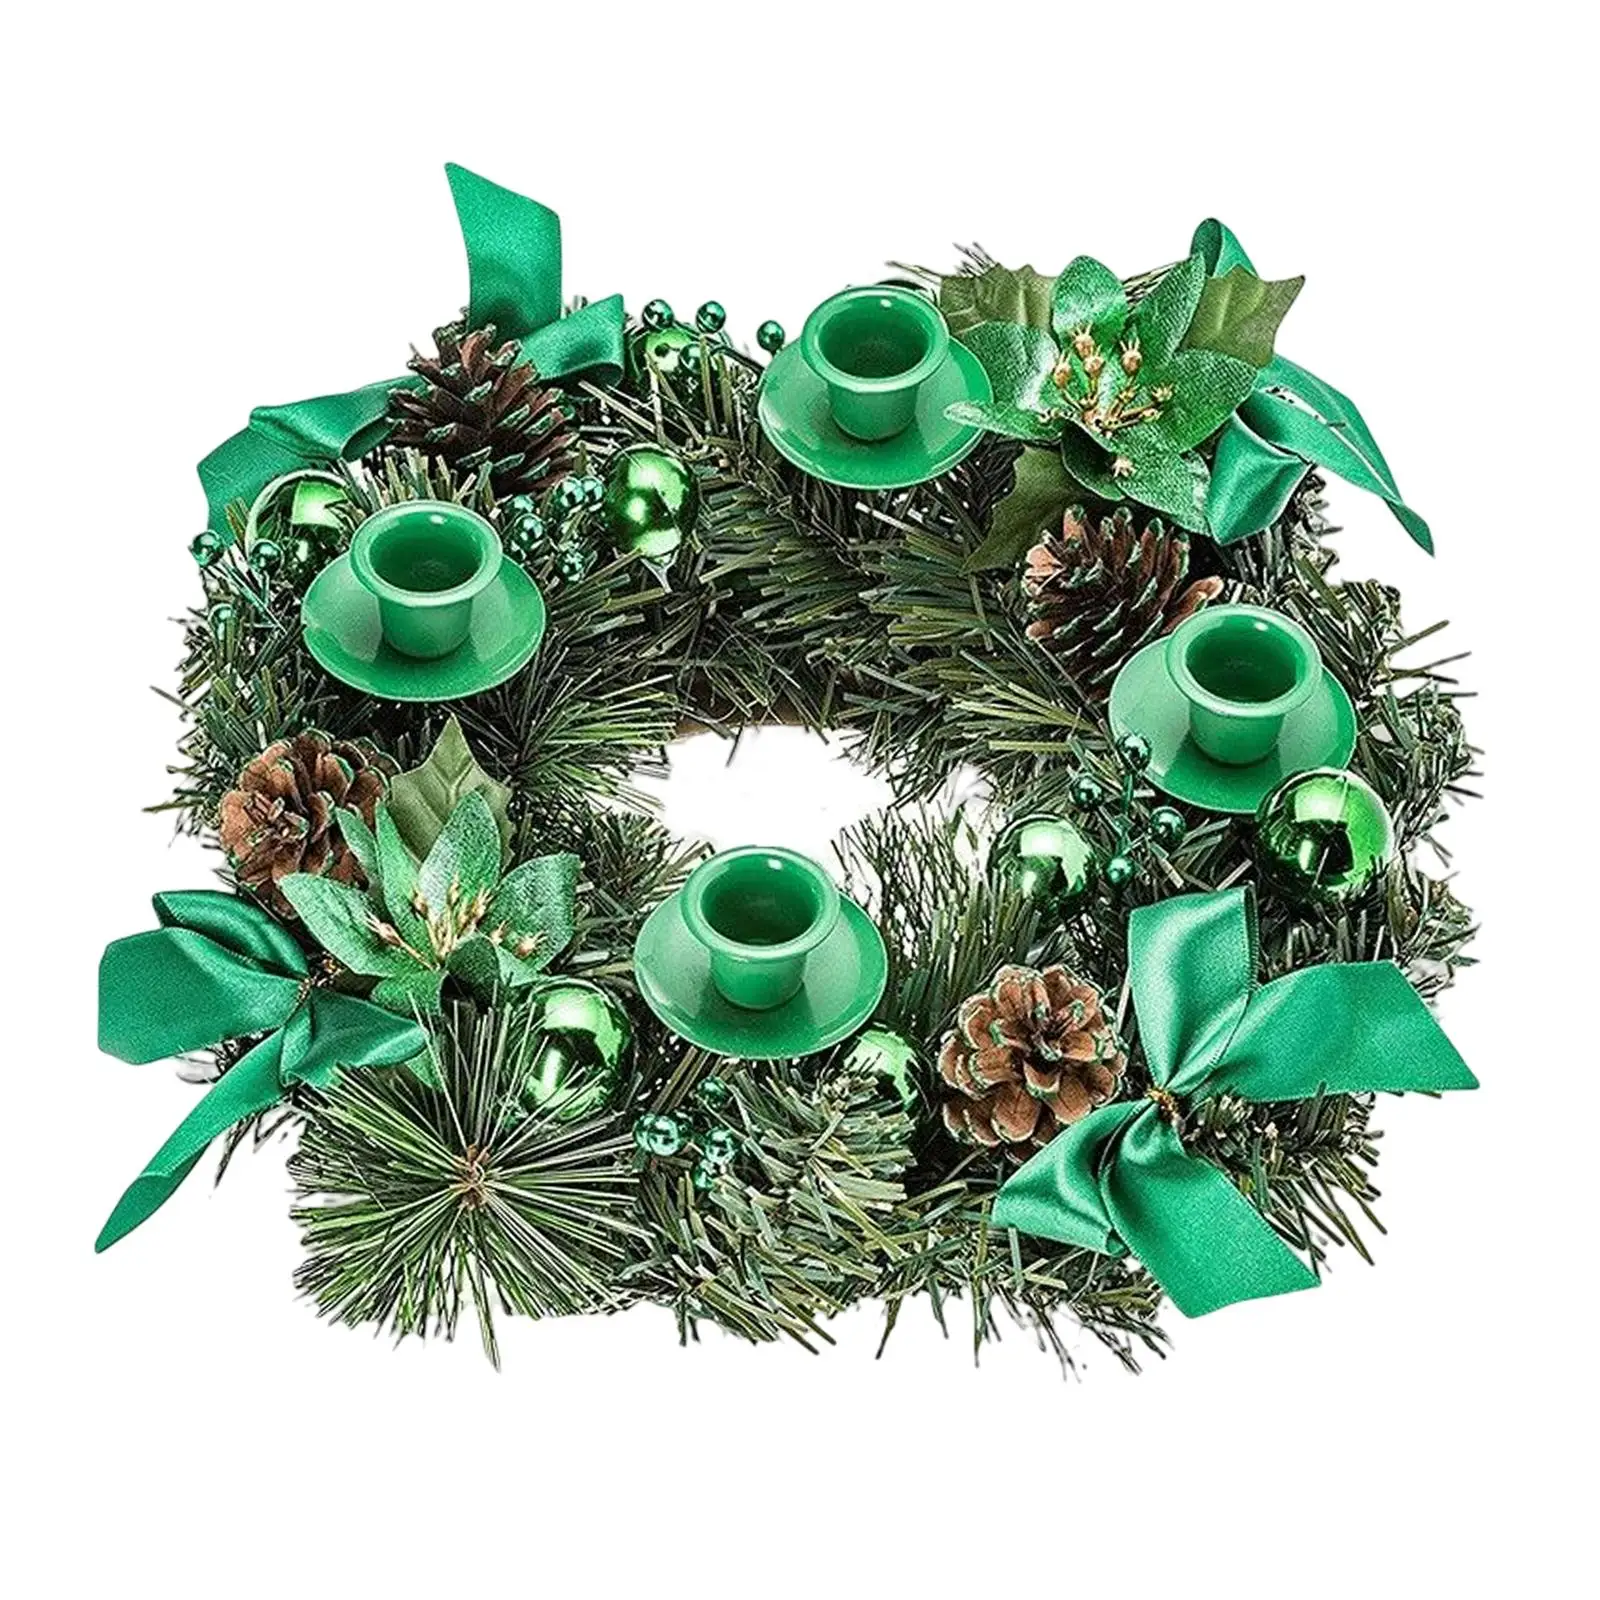 12inch Christmas Advent Wreath Candlestick Centerpiece Decorative with 4 Candle Cups Candles Holder for Home Dining Table Door